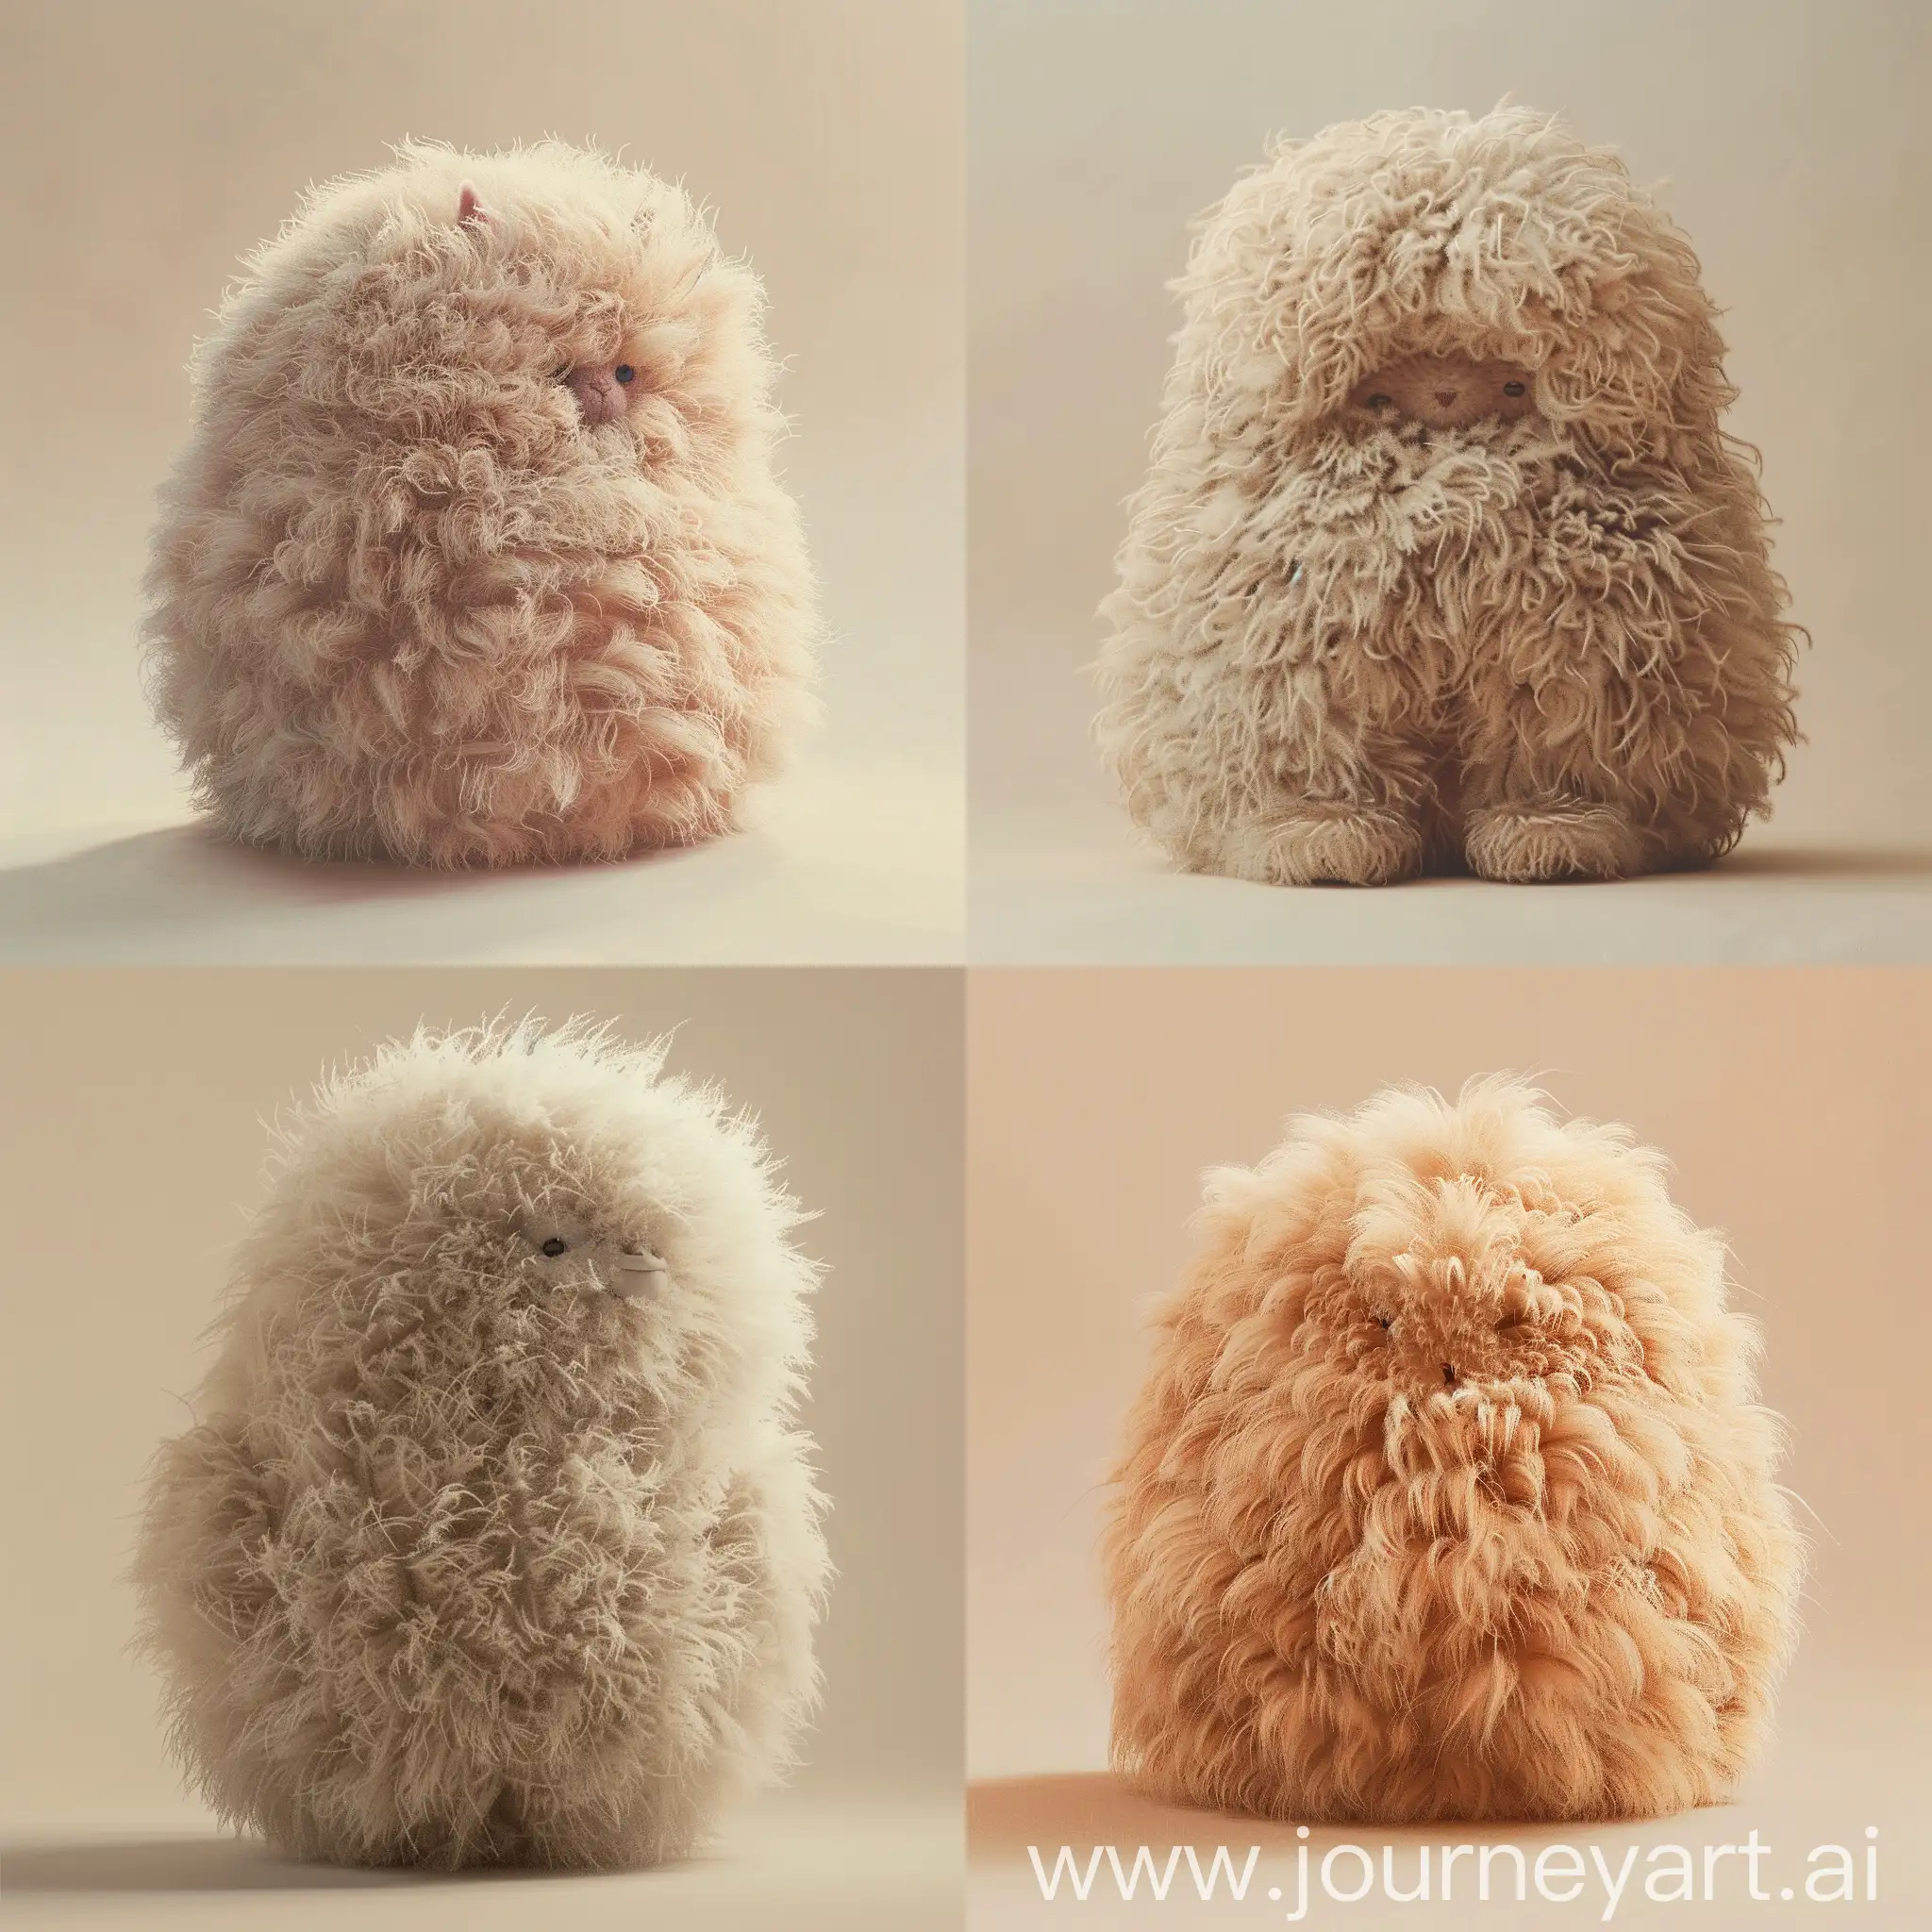 Fluffy-Adorable-Object-with-Soft-Fur